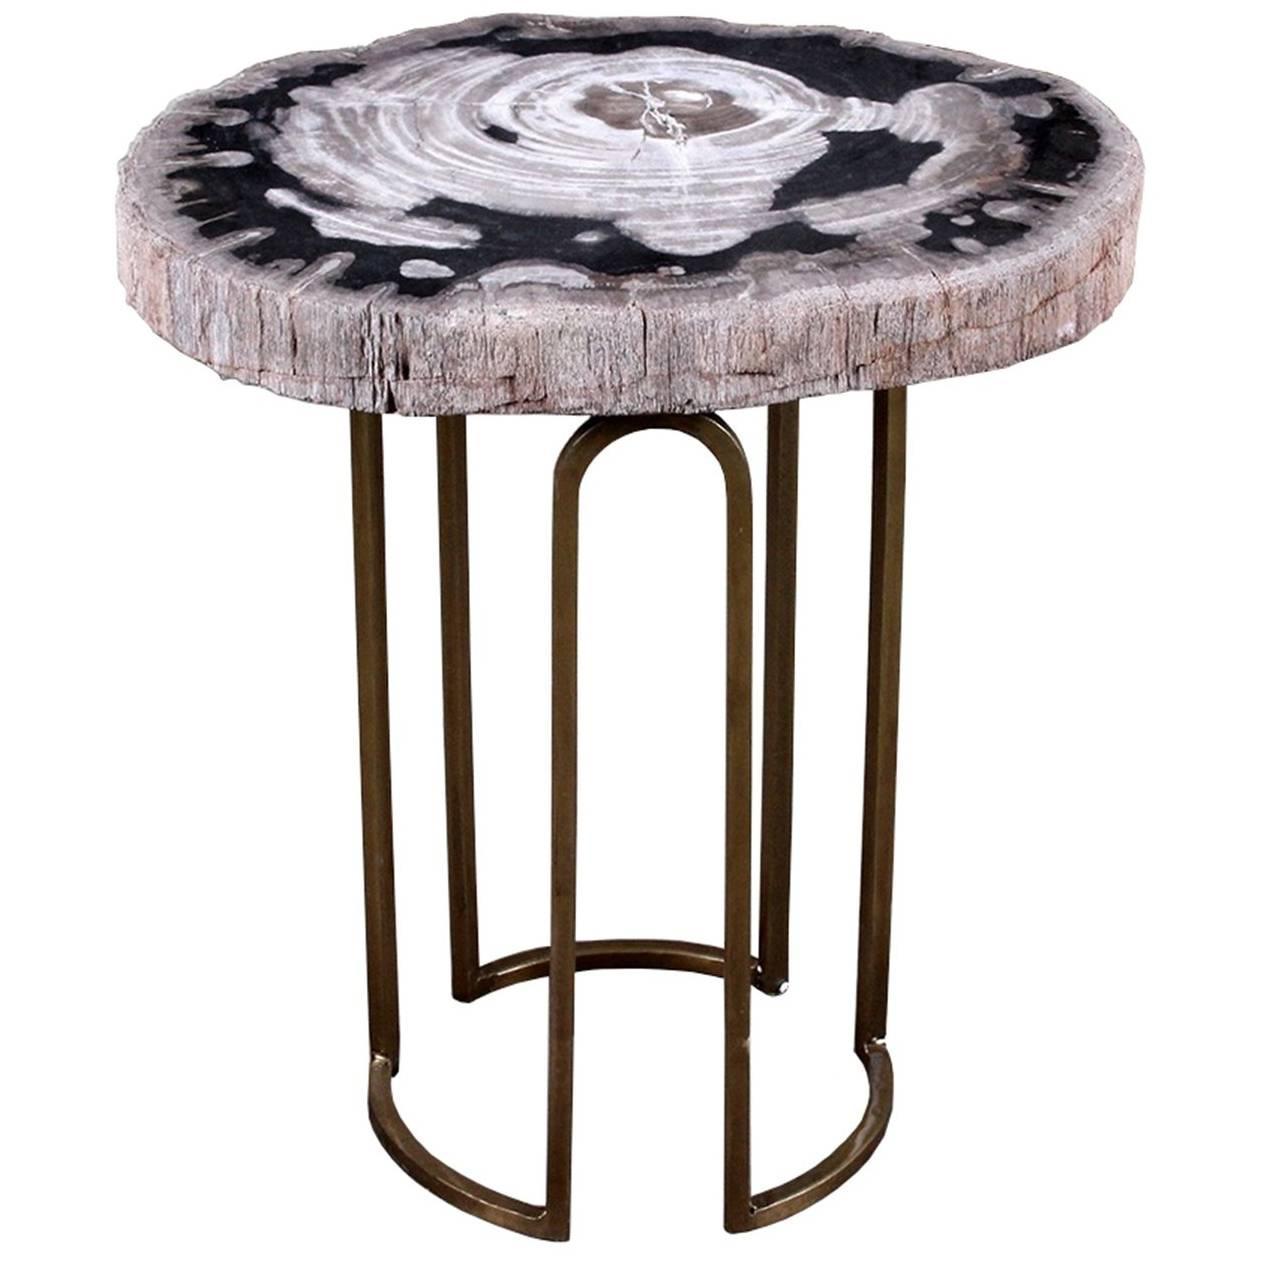 custom petrified wood and brass accent table for img top lawn furniture metal small pier rugs clearance counter height dining set with bench astoria chair round mosaic patio ikea